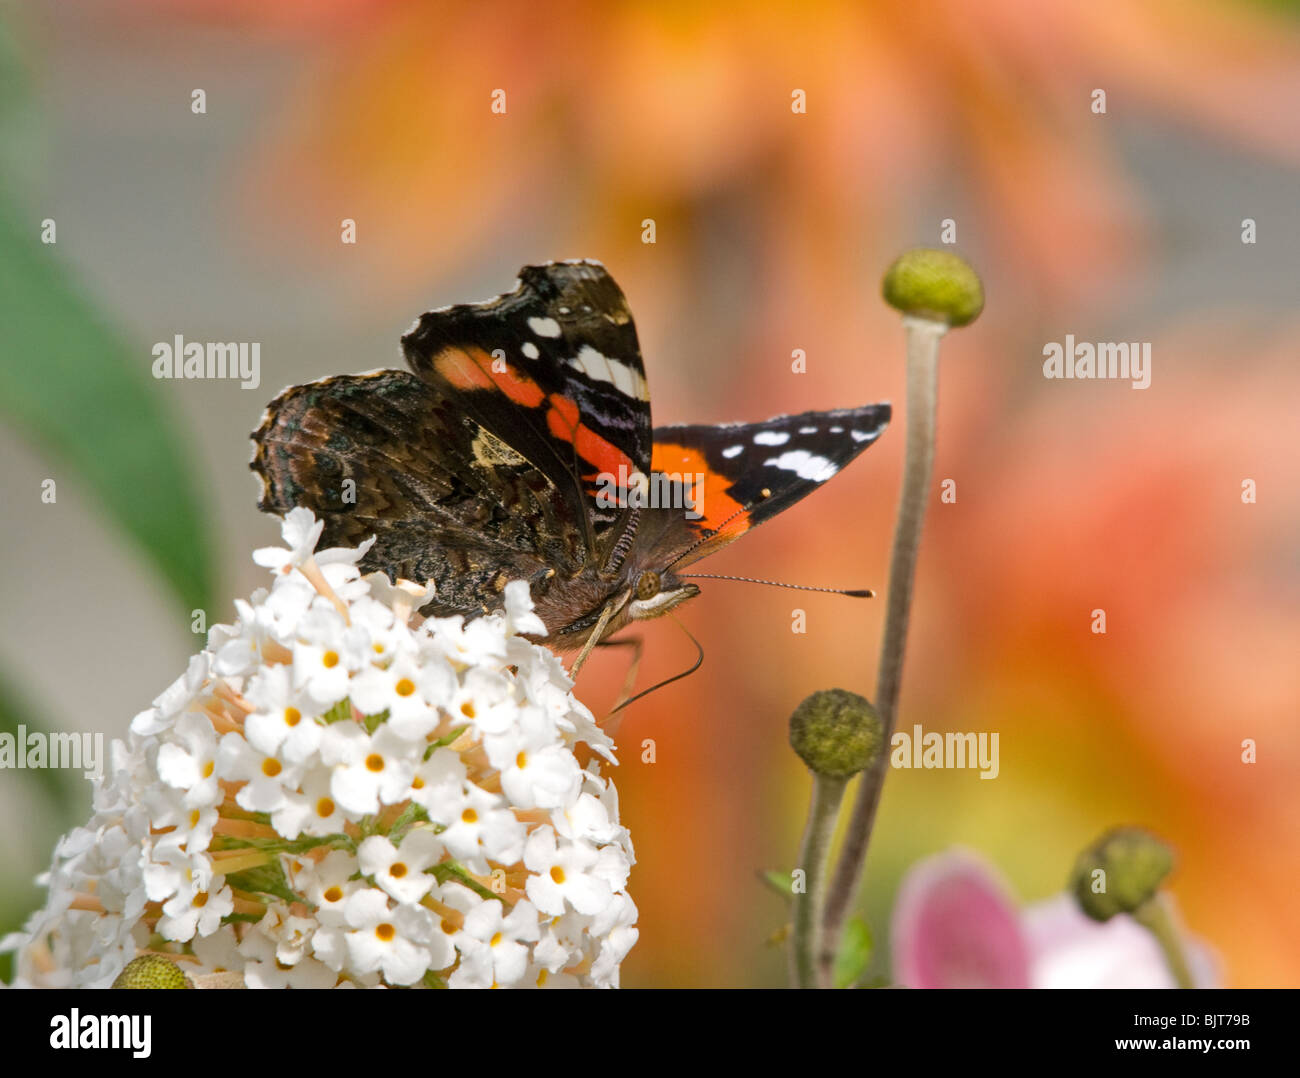 Red Admiral Butterfly 'Vanessa atalanta' on white Buddleia with buds & orange coloured blooms in background Stock Photo